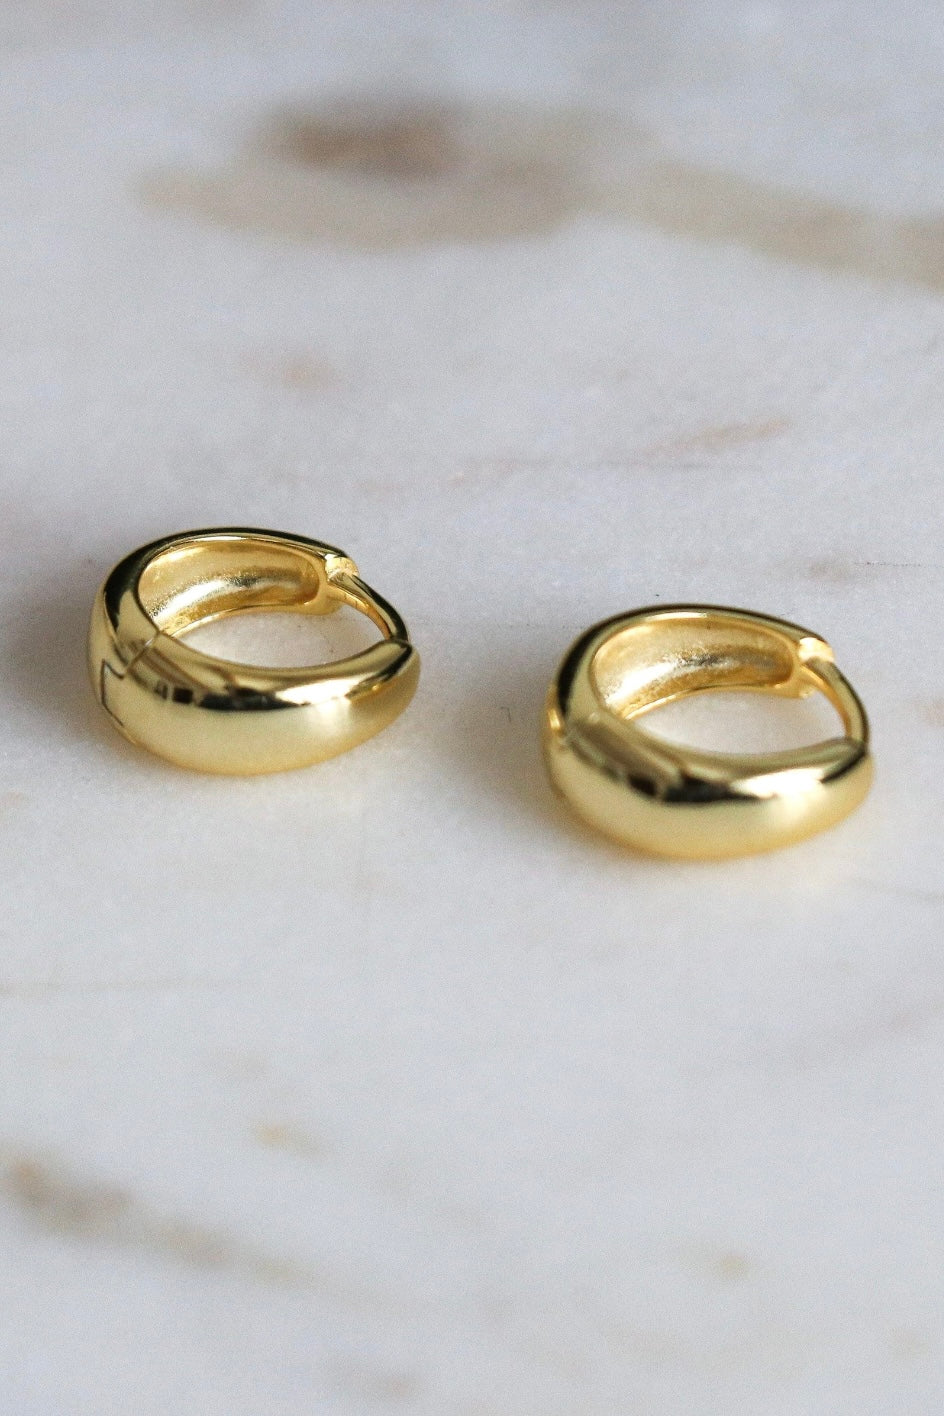 Small, gold huggie hoops